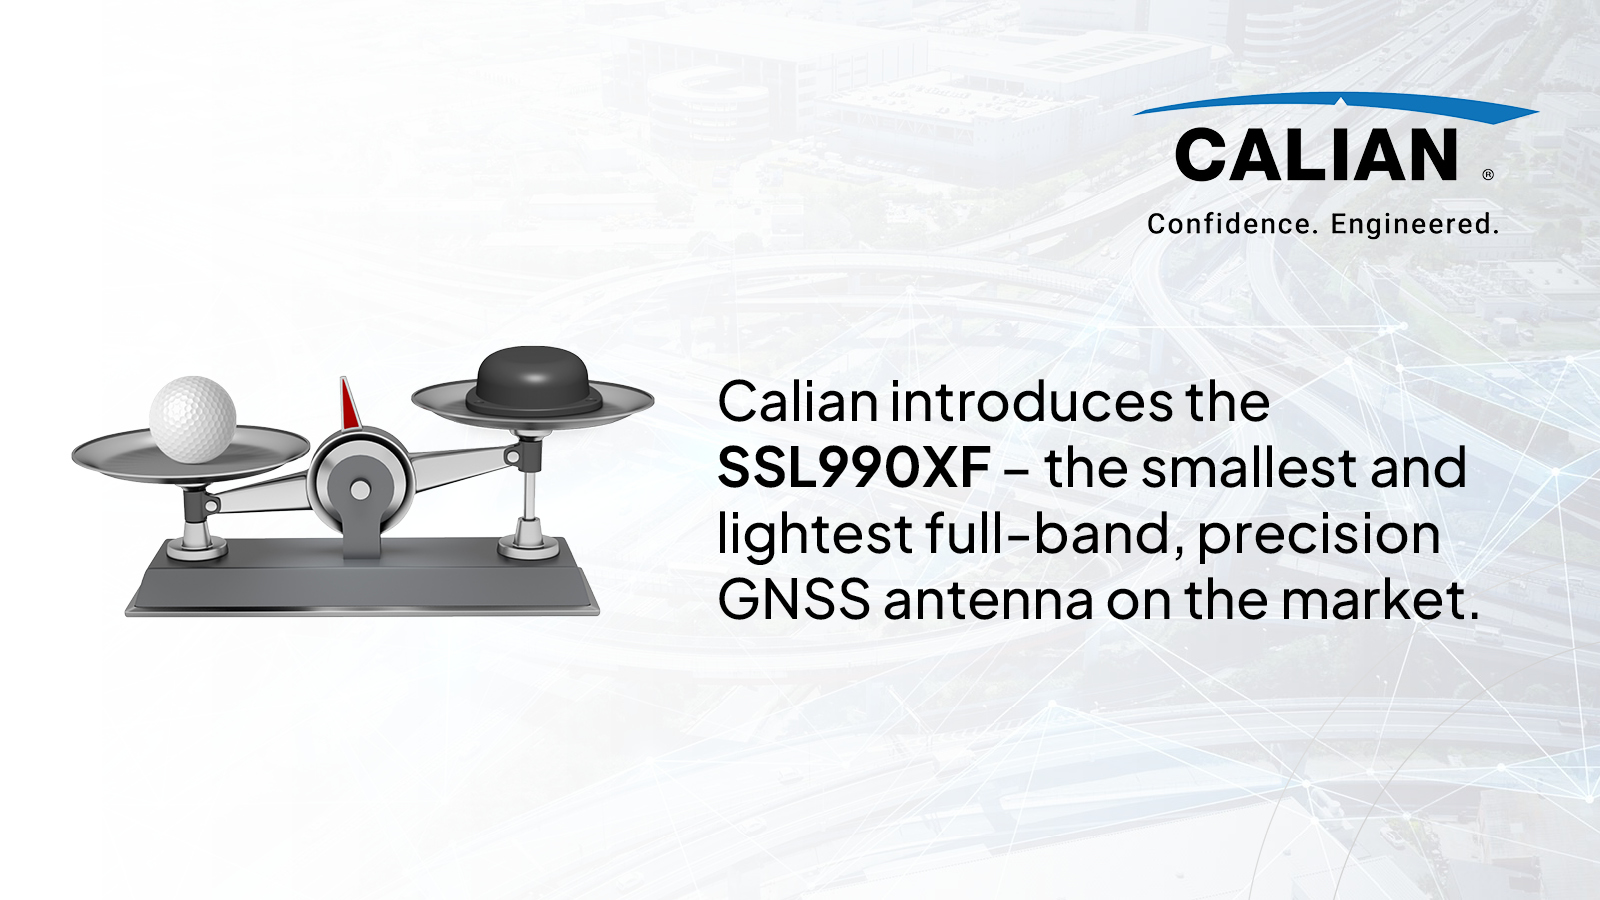 Calian introduces the SSL990XF – the smallest and lightest full-band, precision GNSS antenna on the market.